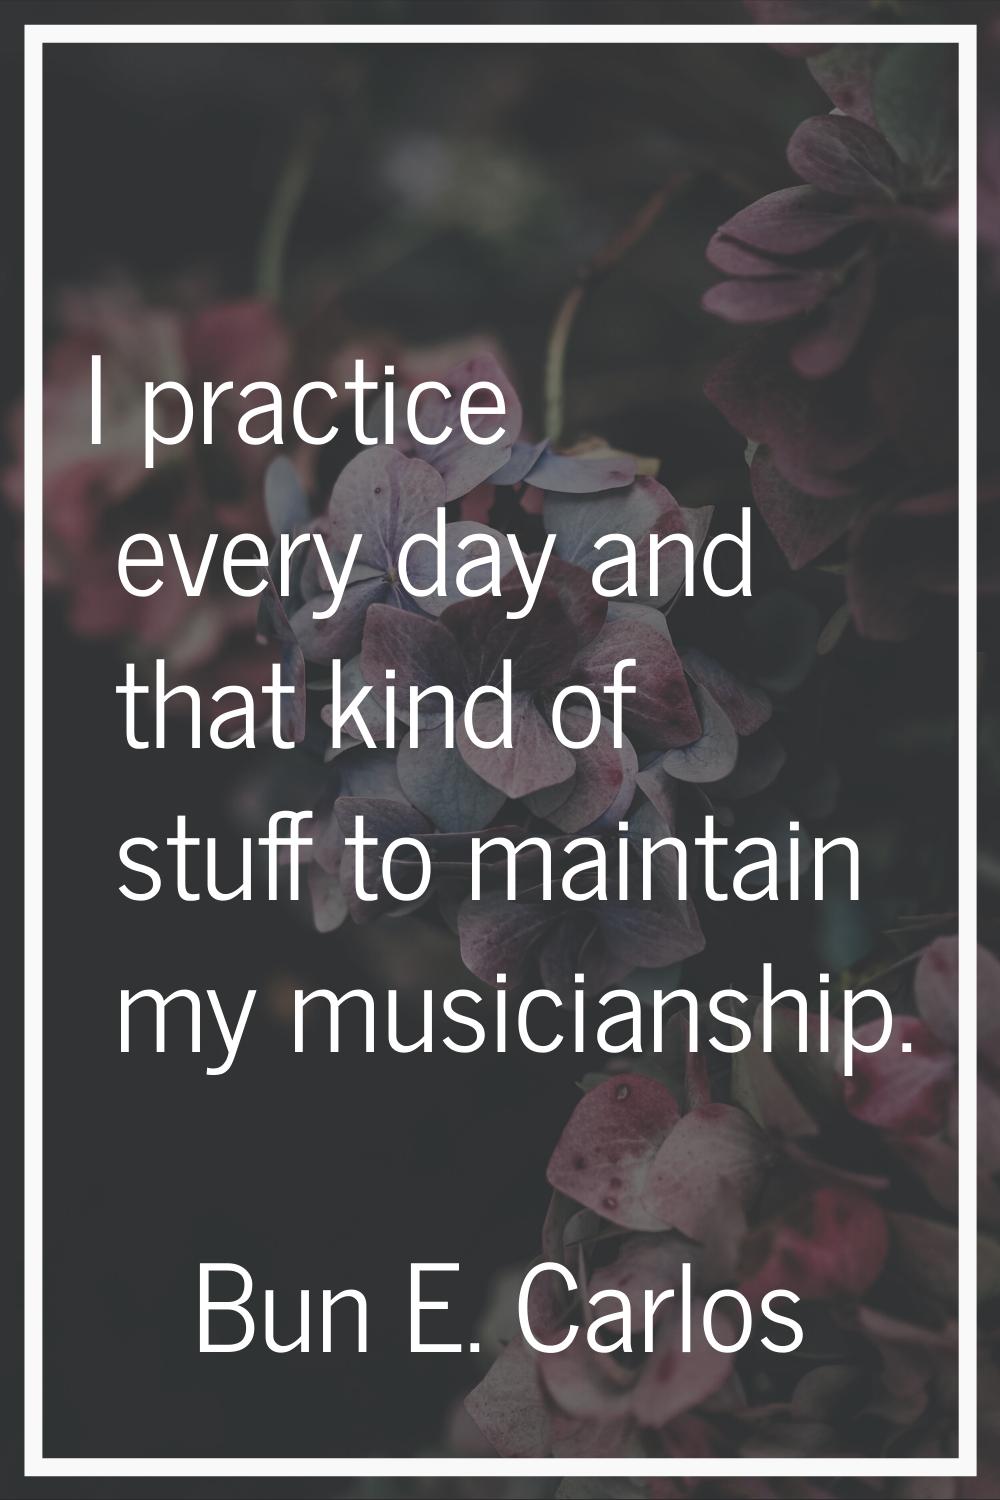 I practice every day and that kind of stuff to maintain my musicianship.